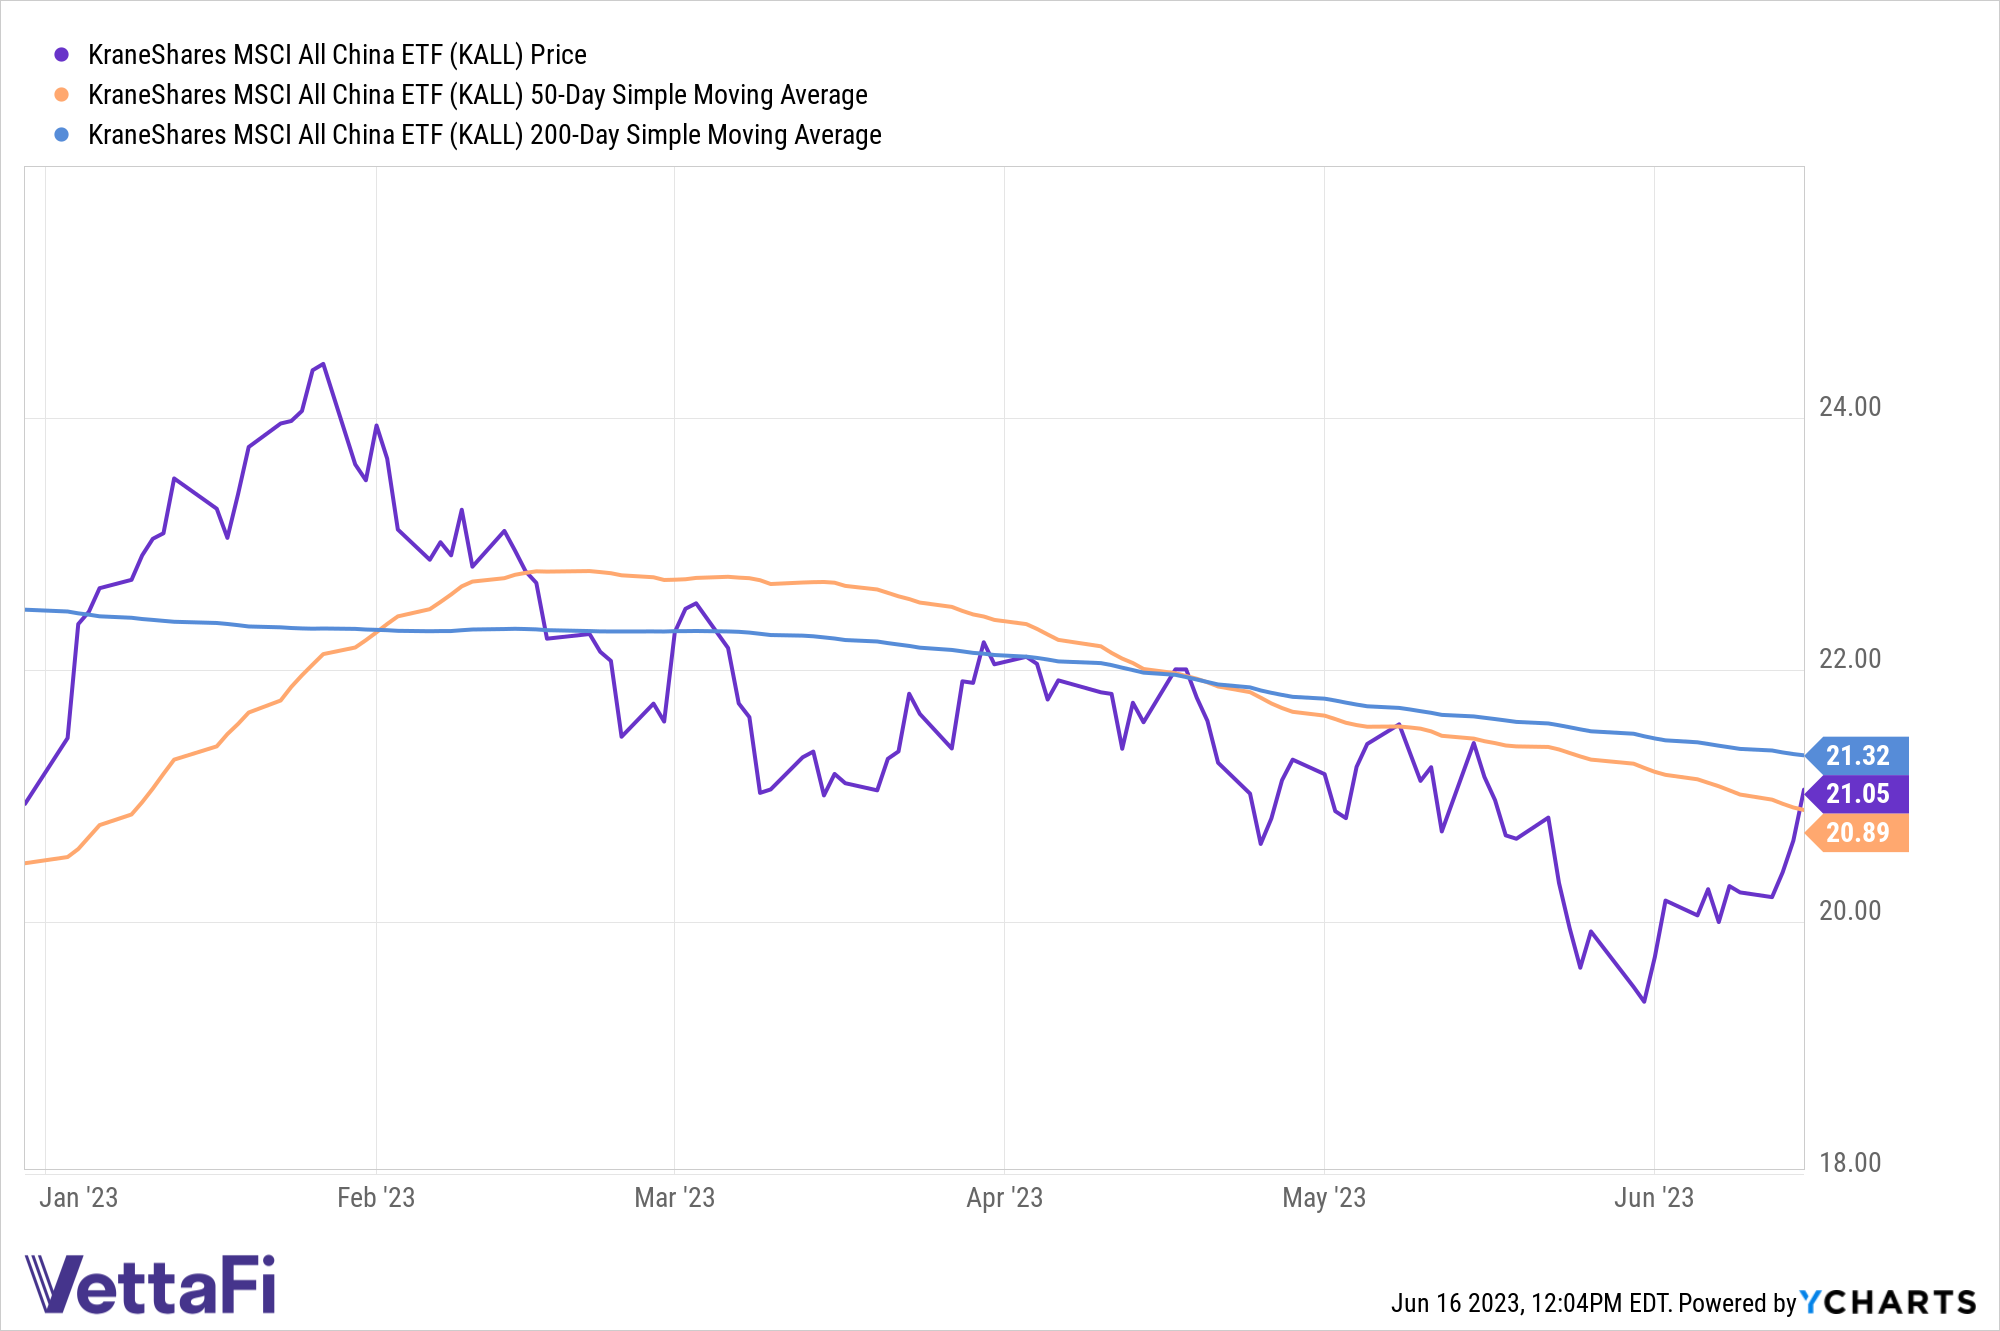 Price graph of KALL ytd (21.05) compared to the 50-day SMA (20.89) and 200-day SMA (21.32).